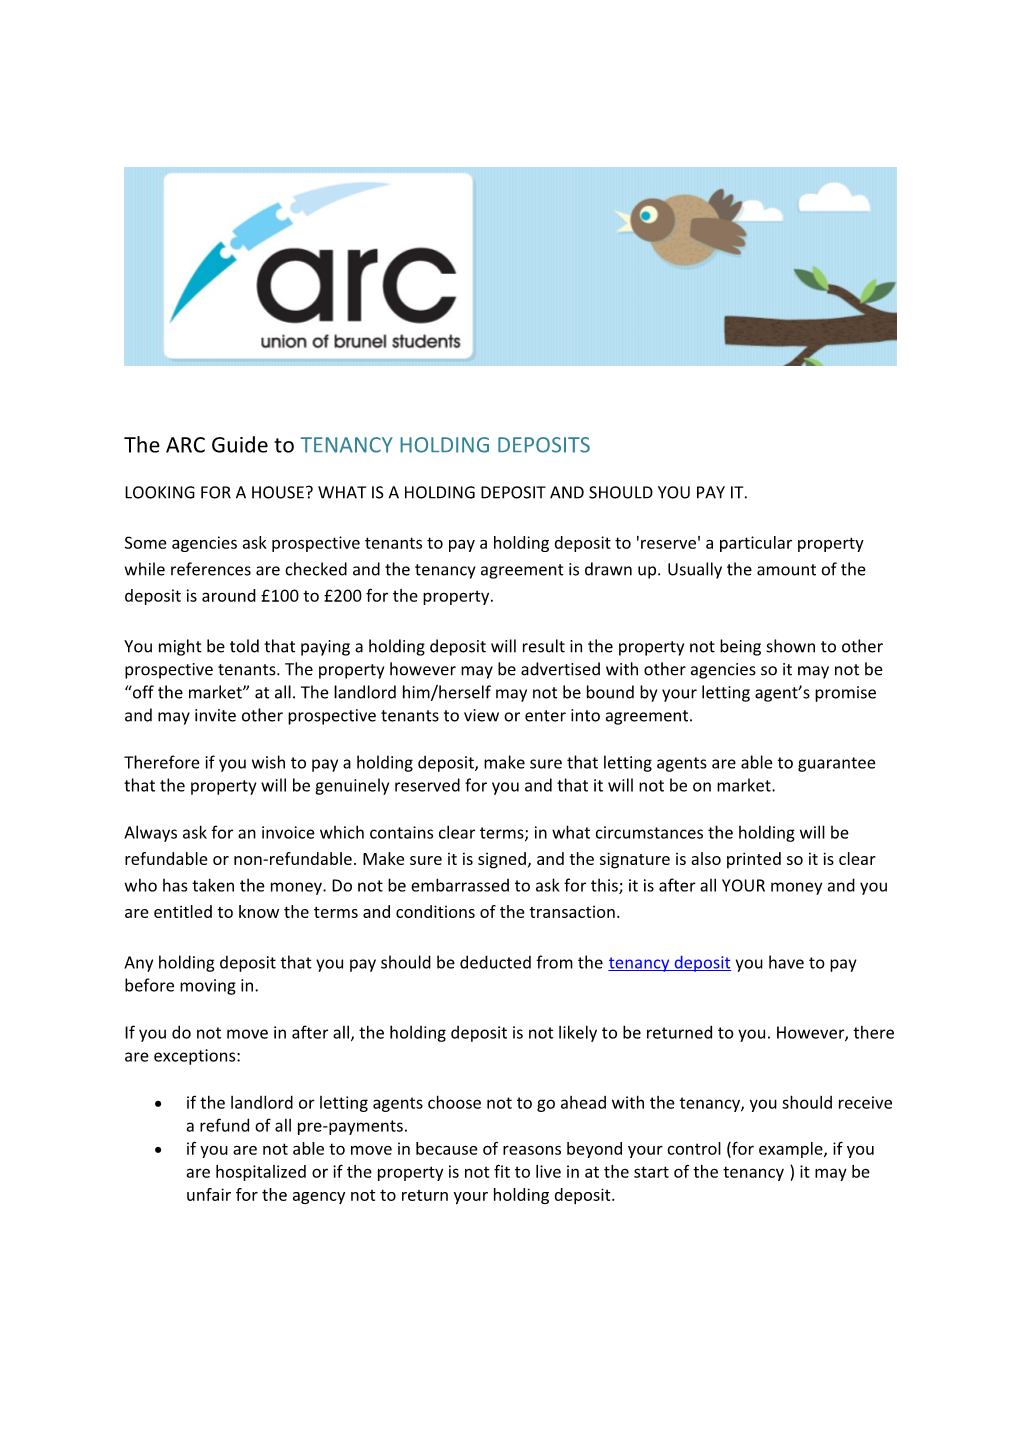 The ARC Guide to TENANCY HOLDING DEPOSITS